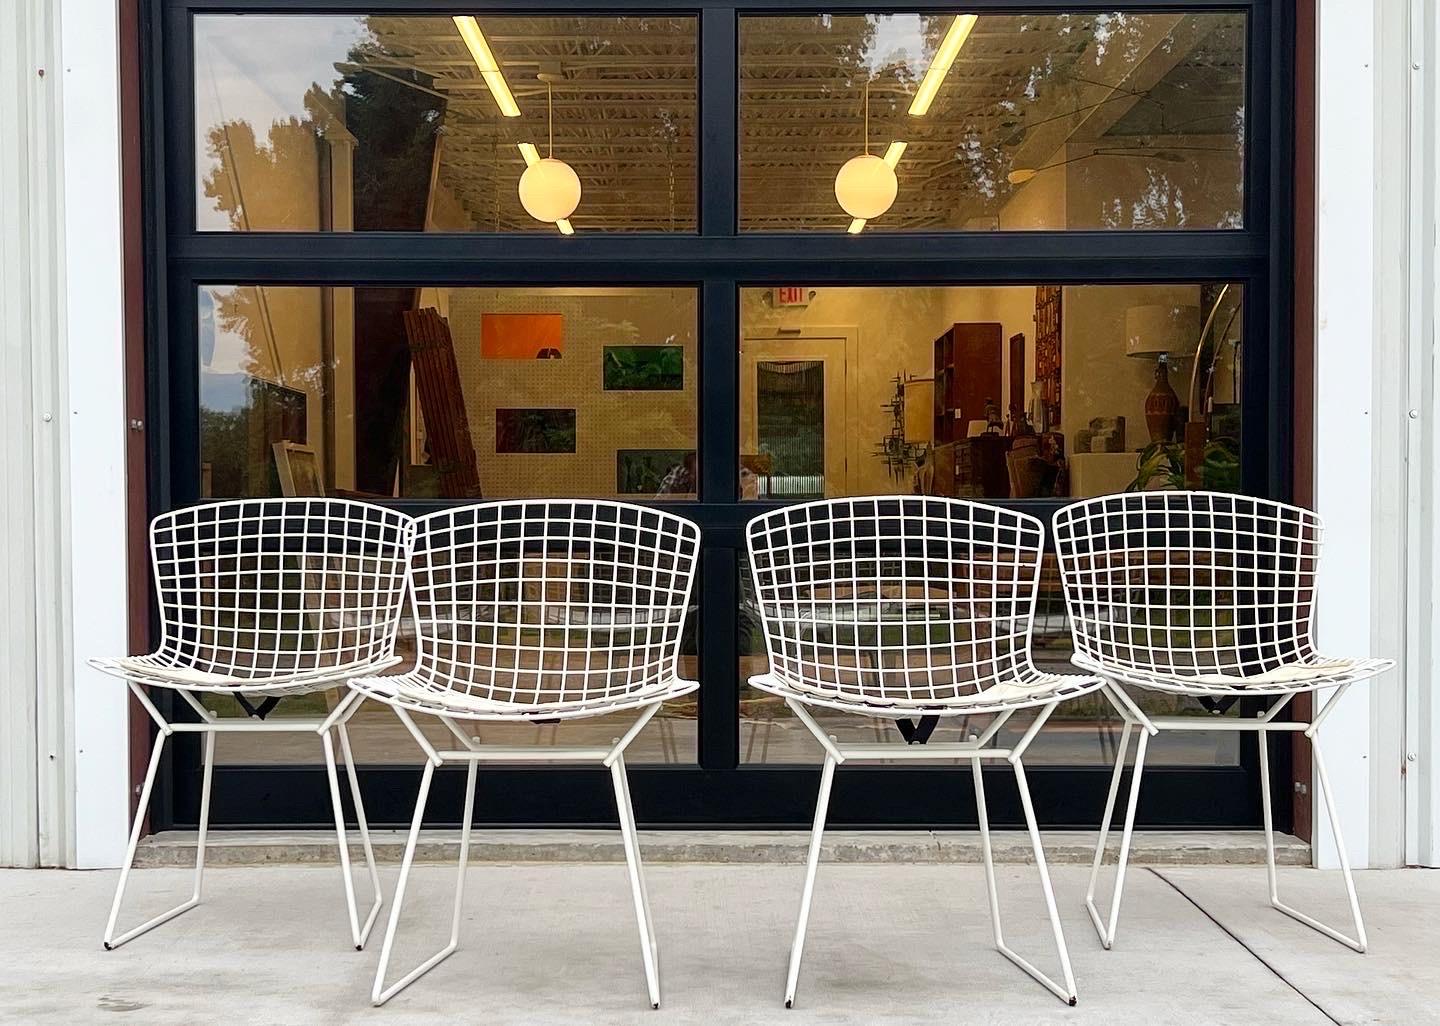 Metal '4' Chairs by Harry Bertoia for Knoll Manufacturing, Circa 1960s